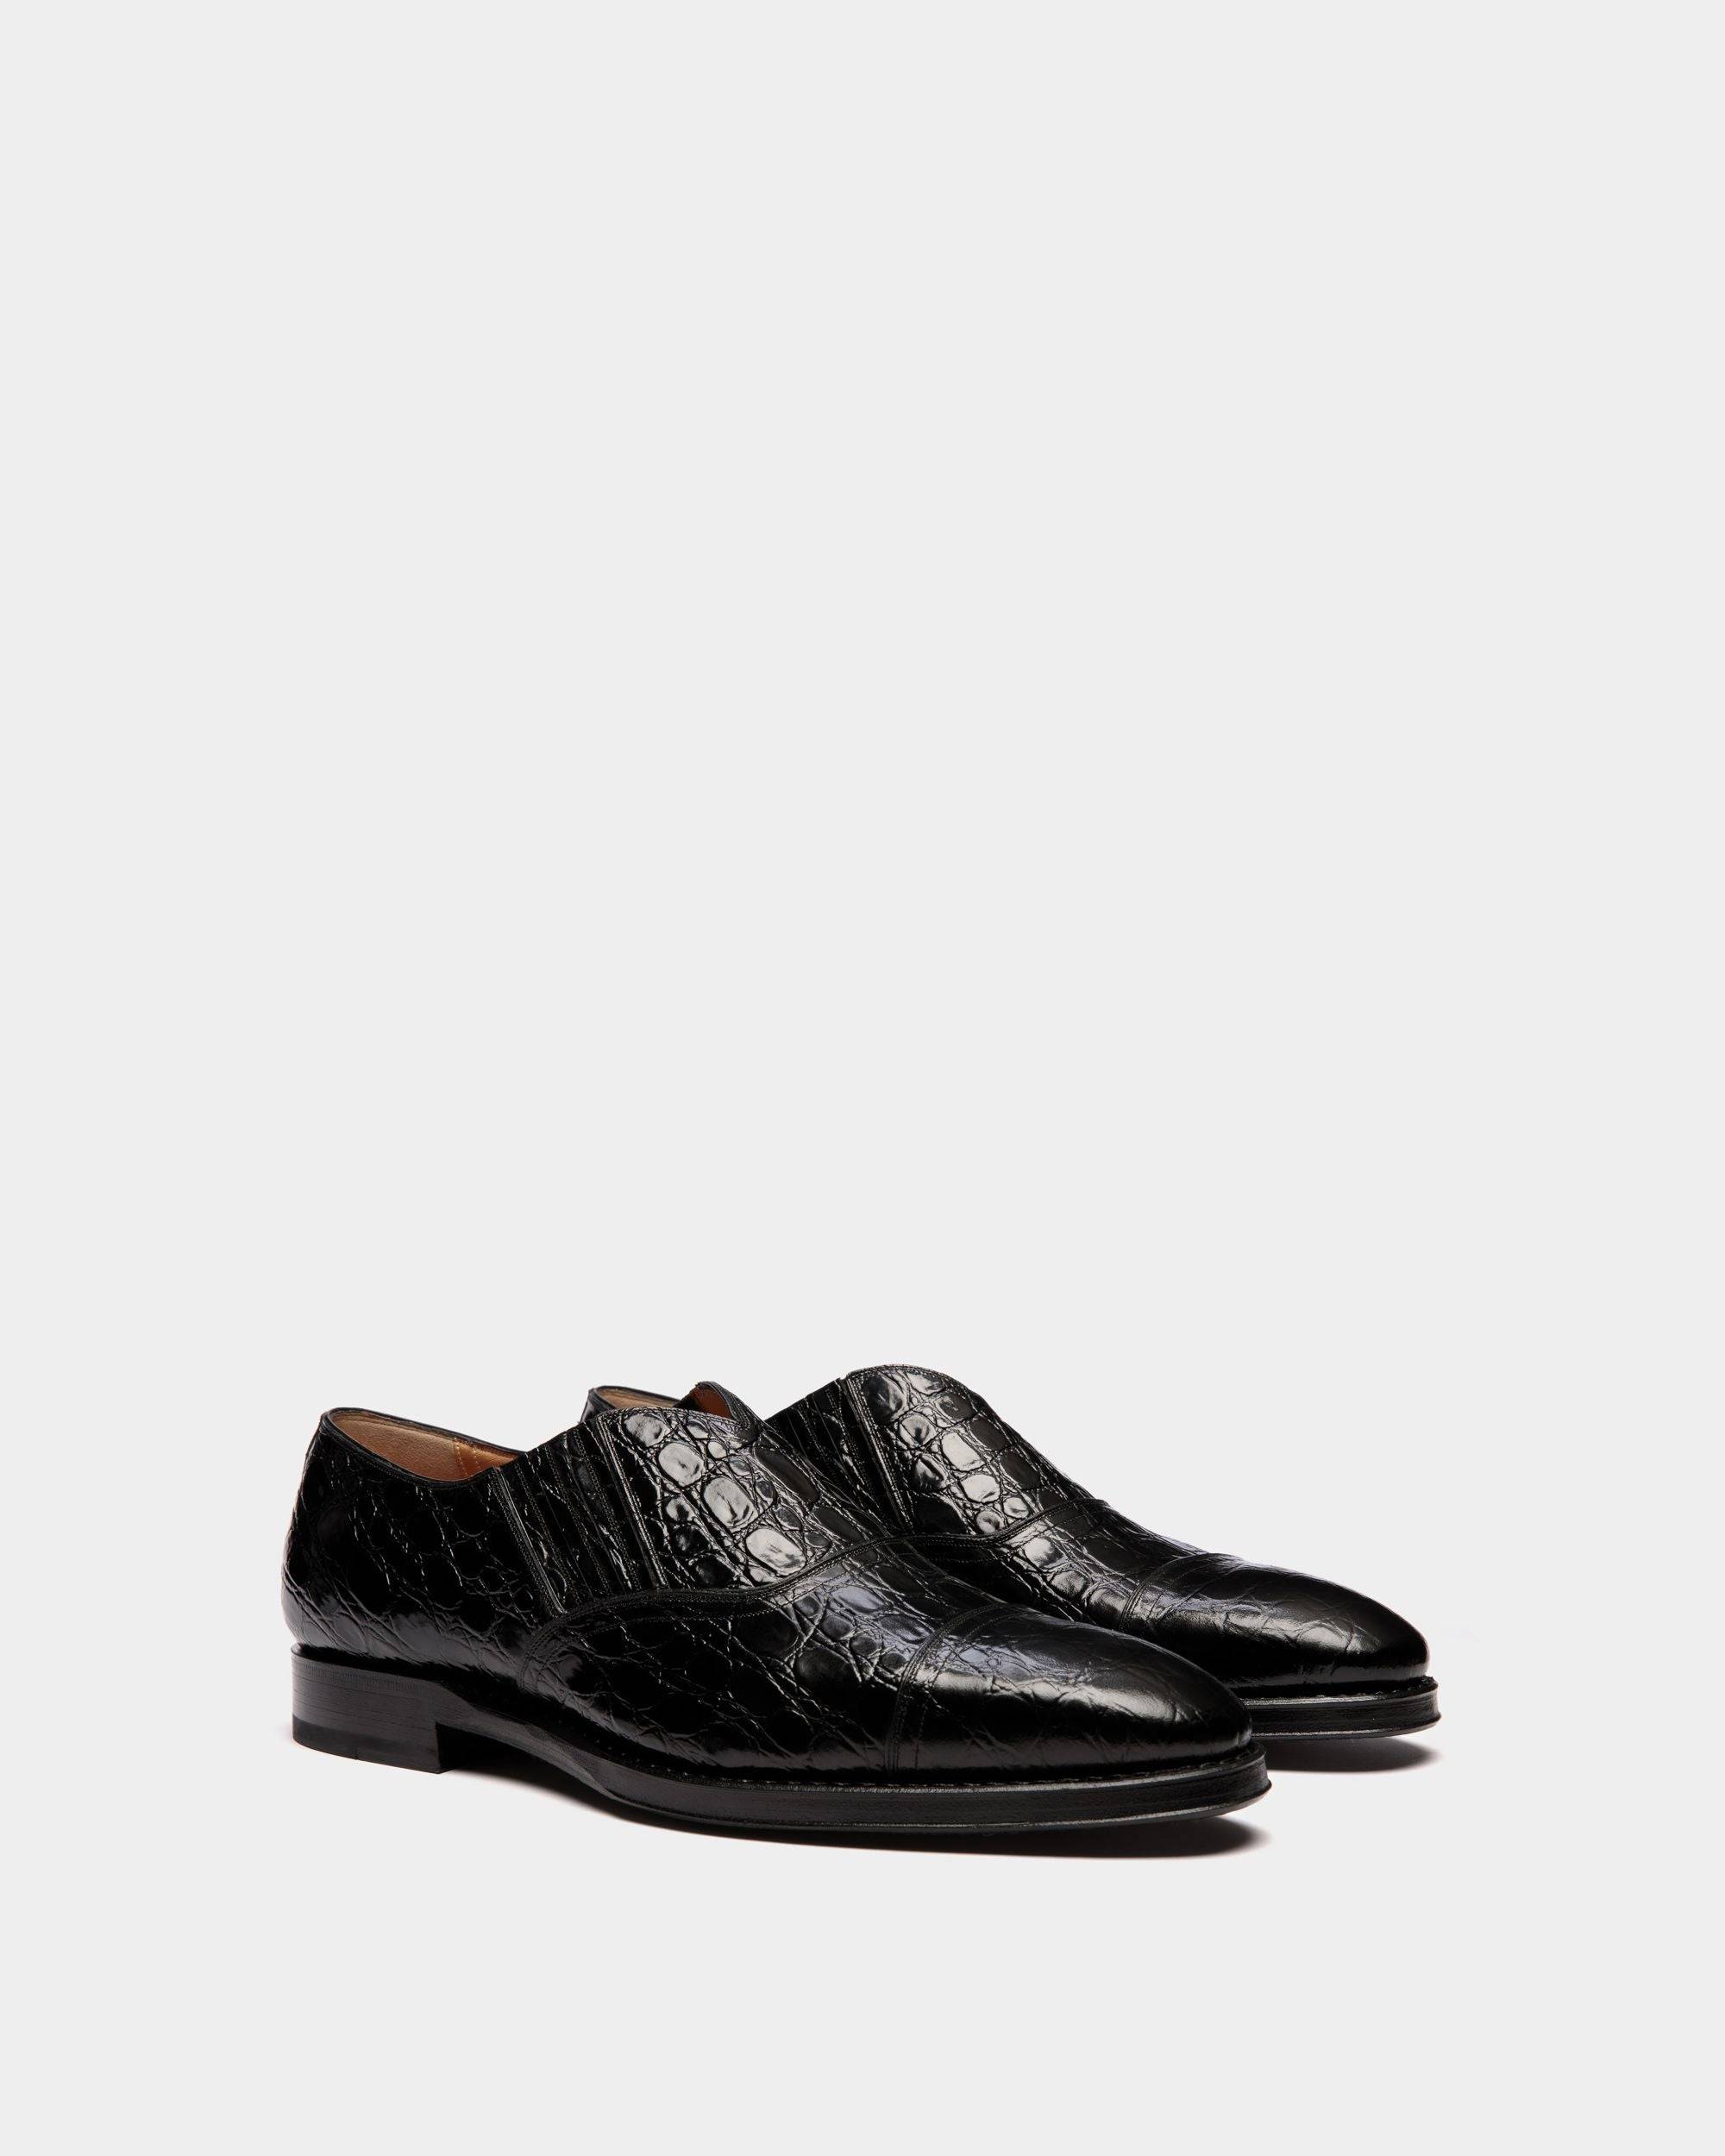 Scribe | Men's Loafer in Black Printed Leather | Bally | Still Life 3/4 Front